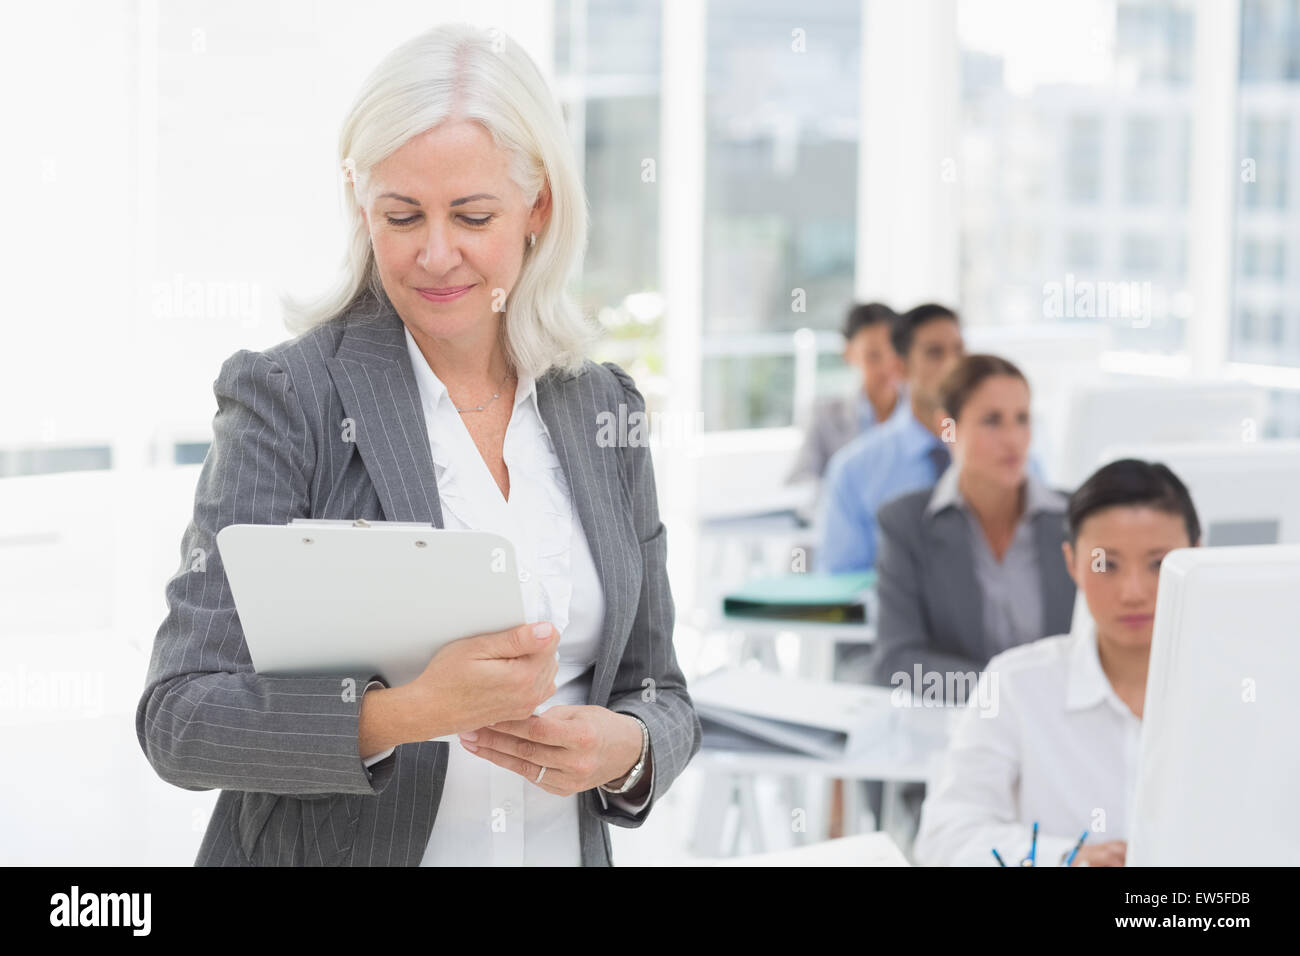 Businesswoman checking her clipboard while team work using computer Stock Photo